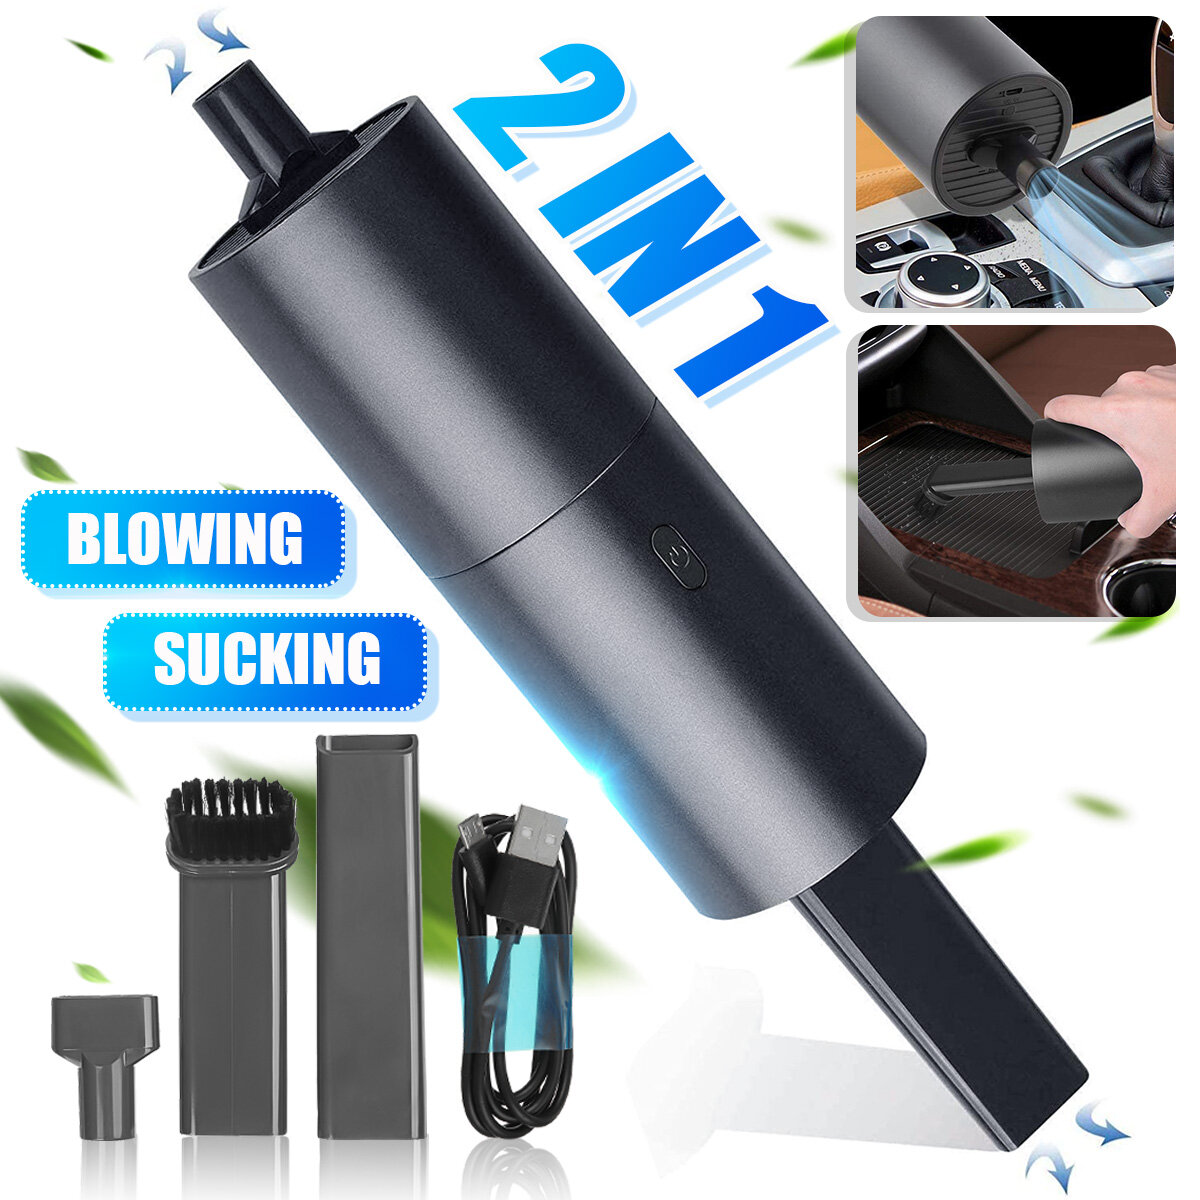 

Bakeey 2 In 1 Cordless Air Duster & Vacuum Cleaner Electric Air Blower Handheld Powerful Cleaning For Computer Keyboard